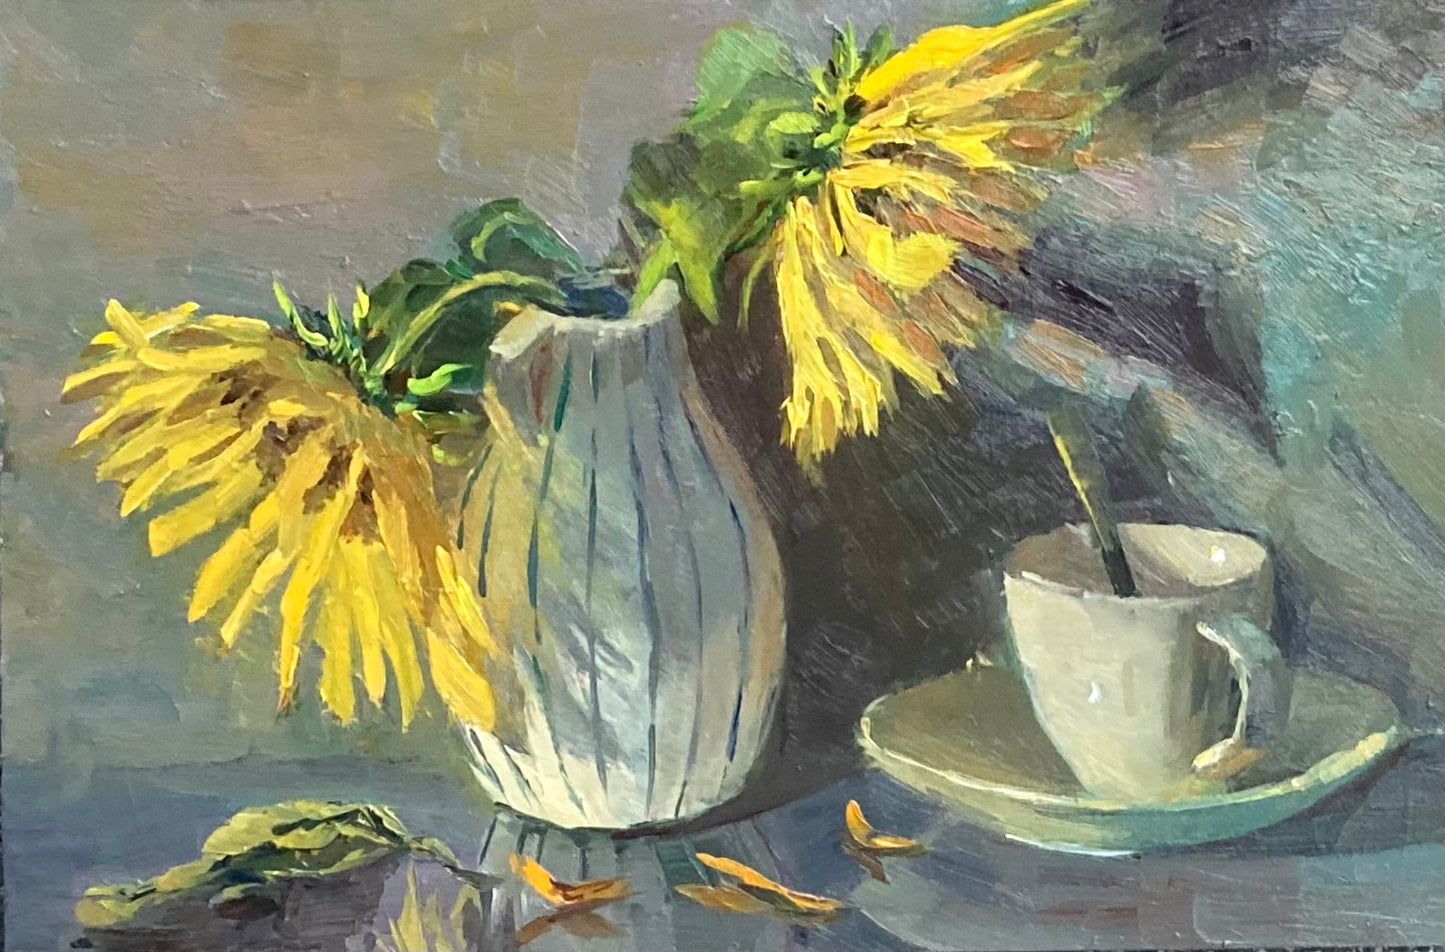 Sunflower Series 29 - Original Stilllife Painting, 12 by 8 inches